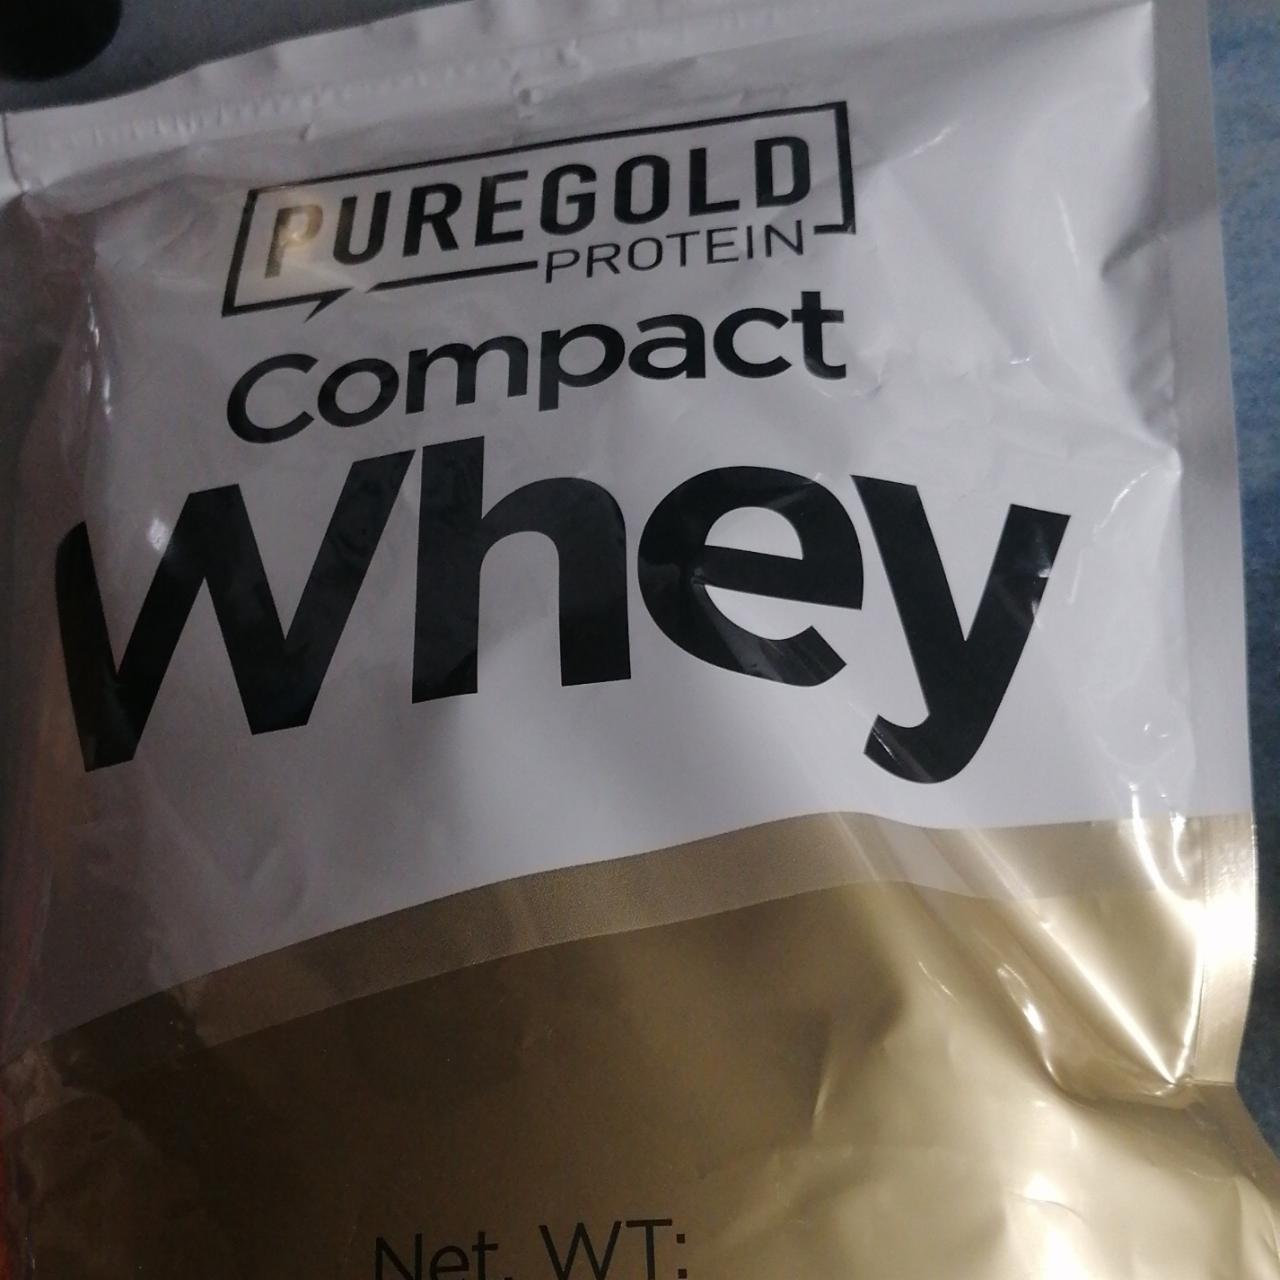 Képek - Protein compact whey Pure Gold